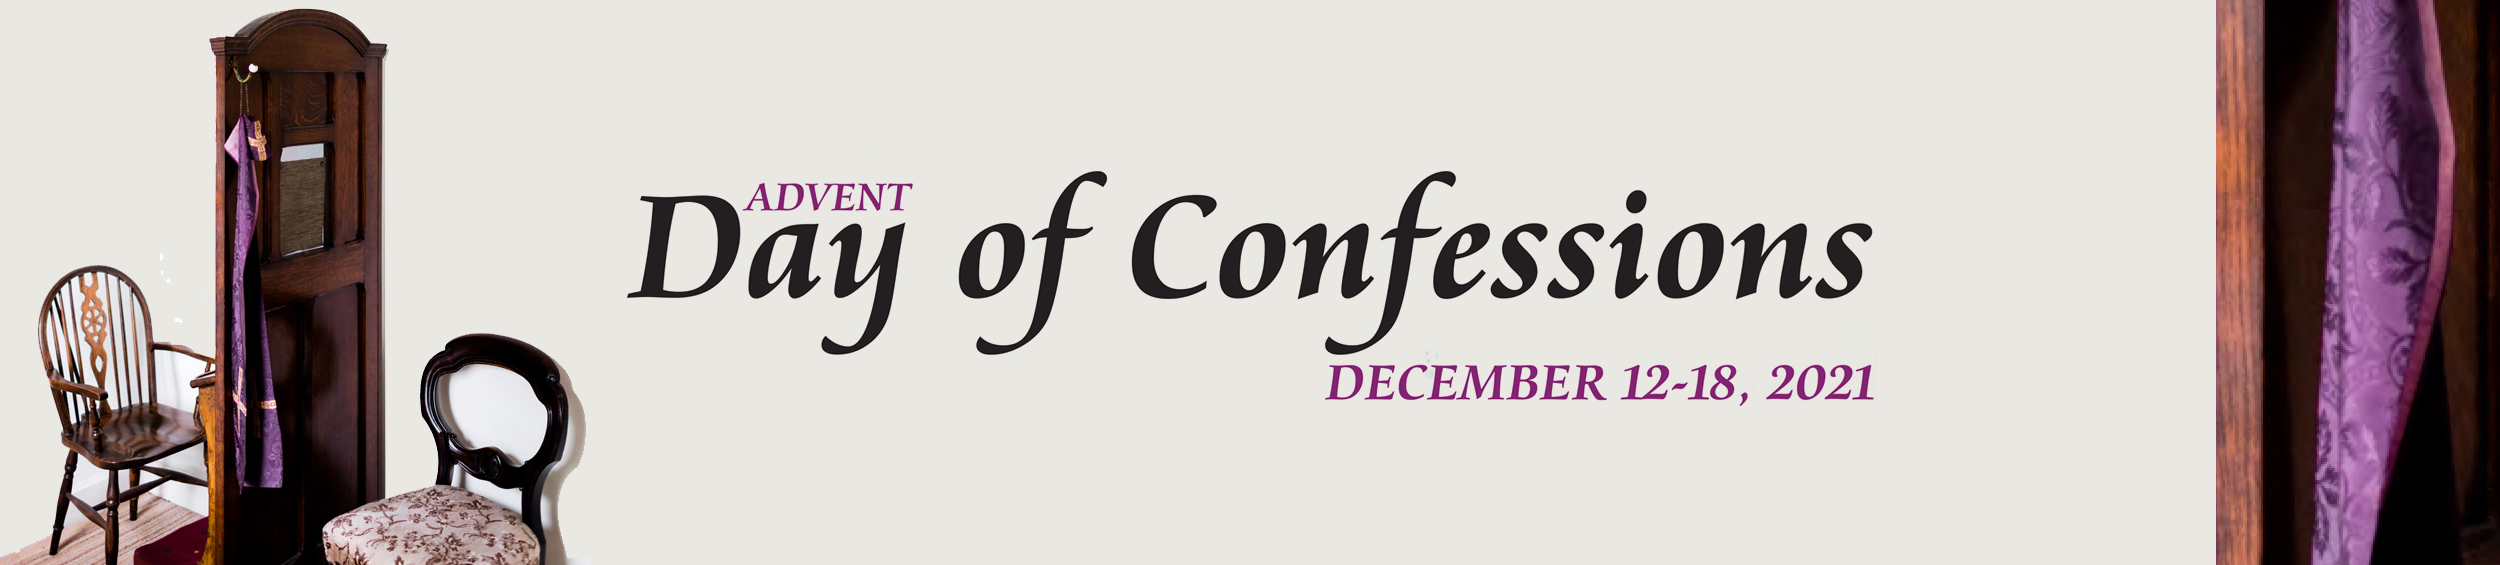 Day of Confessions for Advent 2021